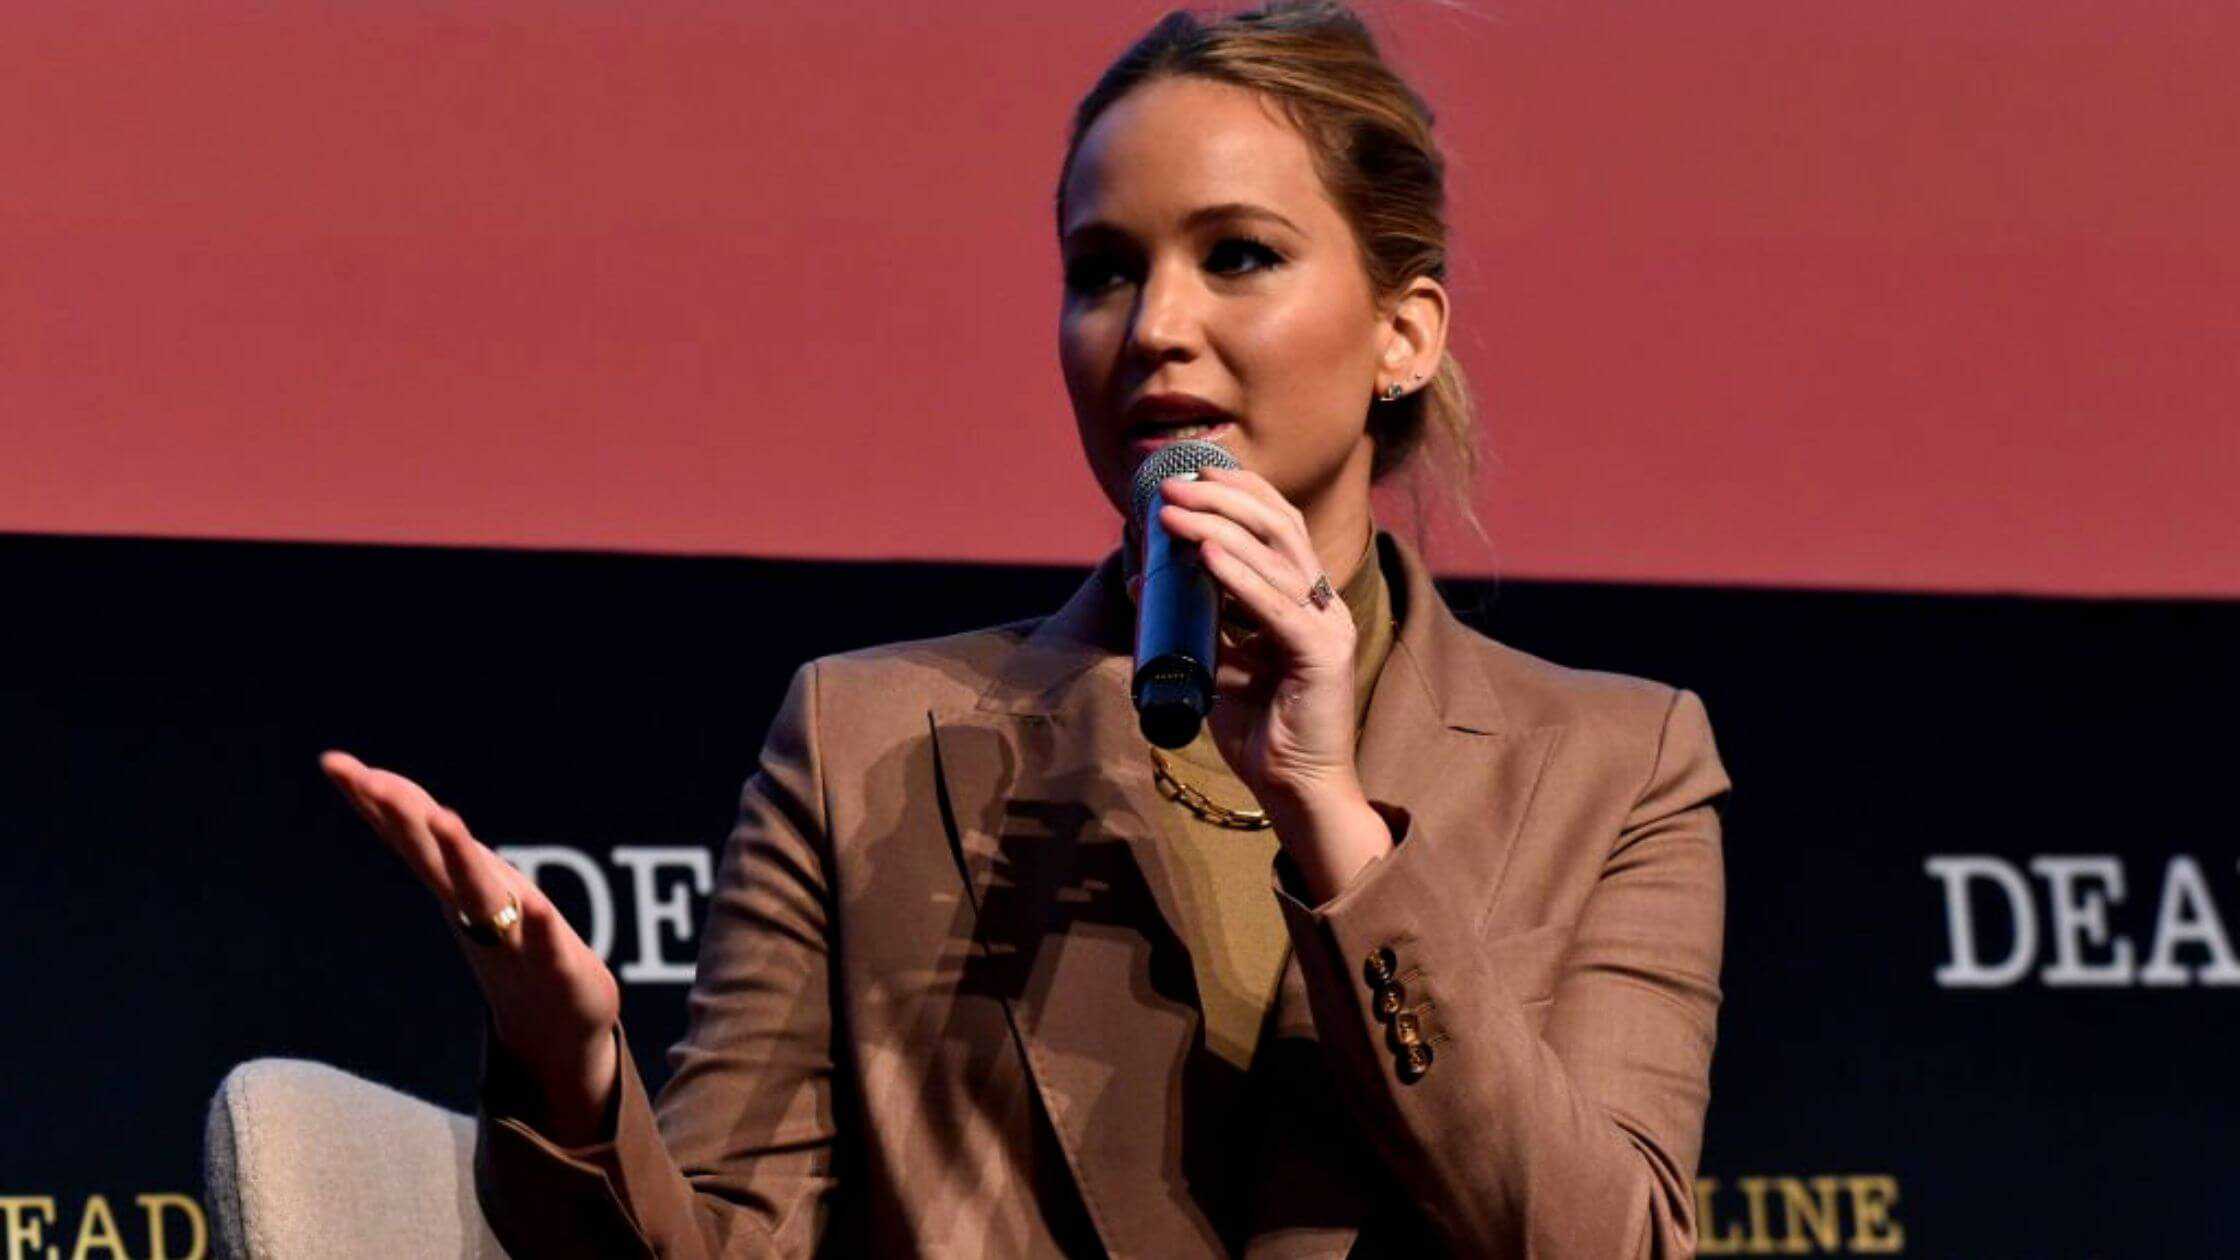 Jennifer Lawrence Is Aware That There Have Been Other Female Action Movie Stars